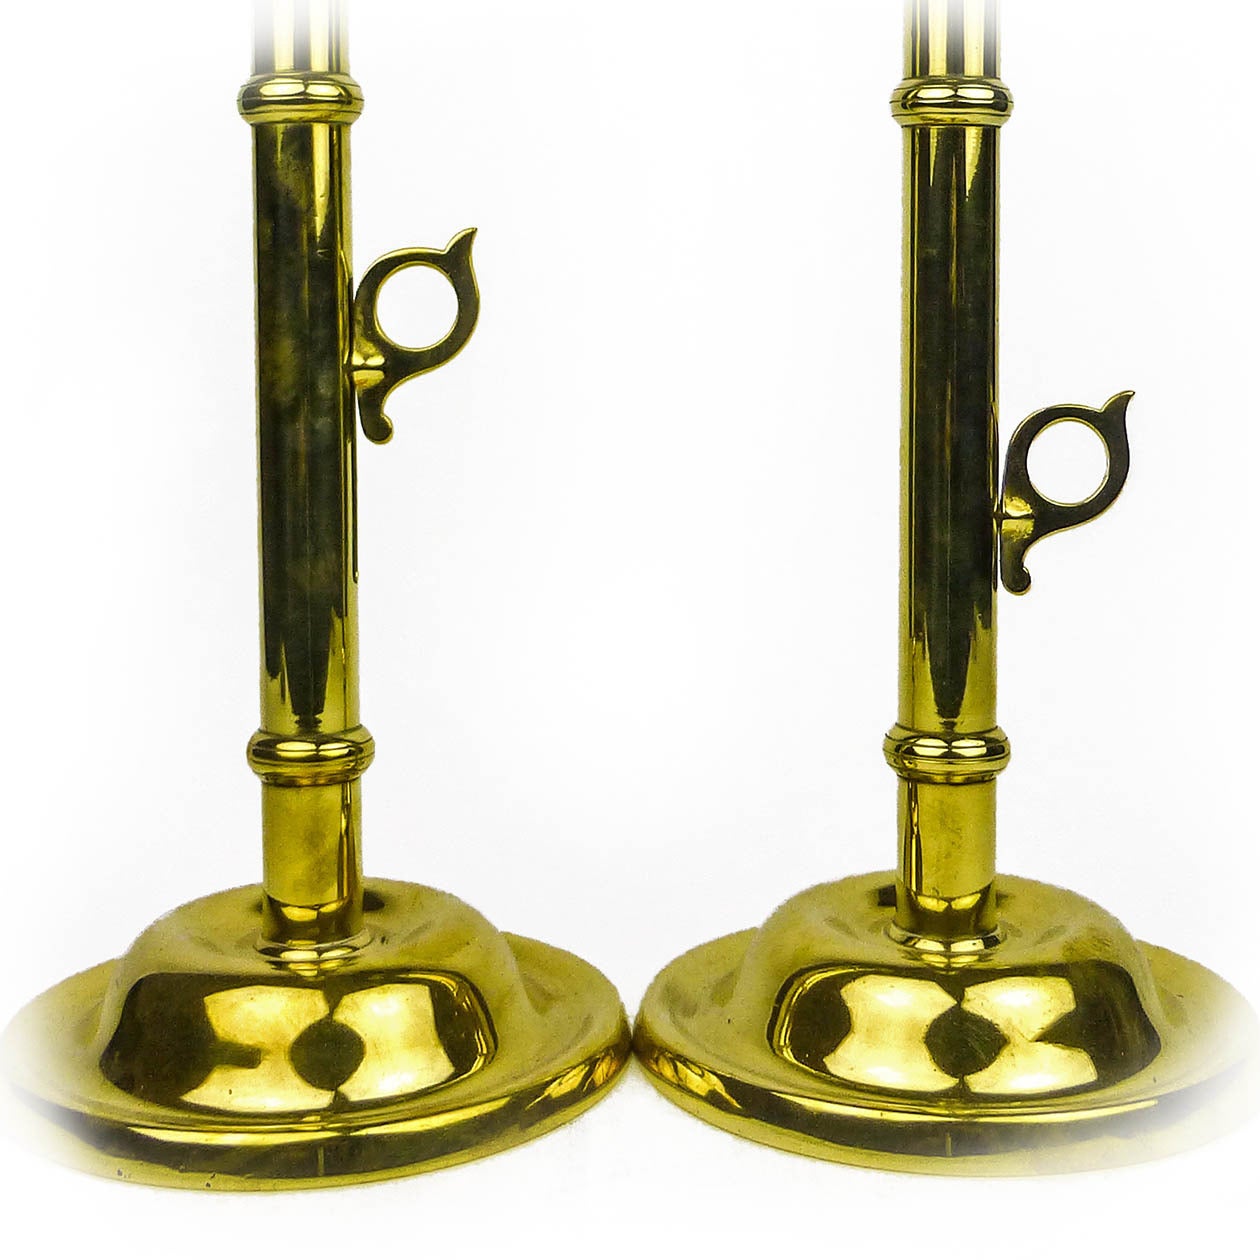 Tall pair of English Victorian brass side ejector pulpit candlesticks, circa 1850.

Single seamed construction with three “Wedding Bands.”

Measures: Height 20″, base diameter 7″.